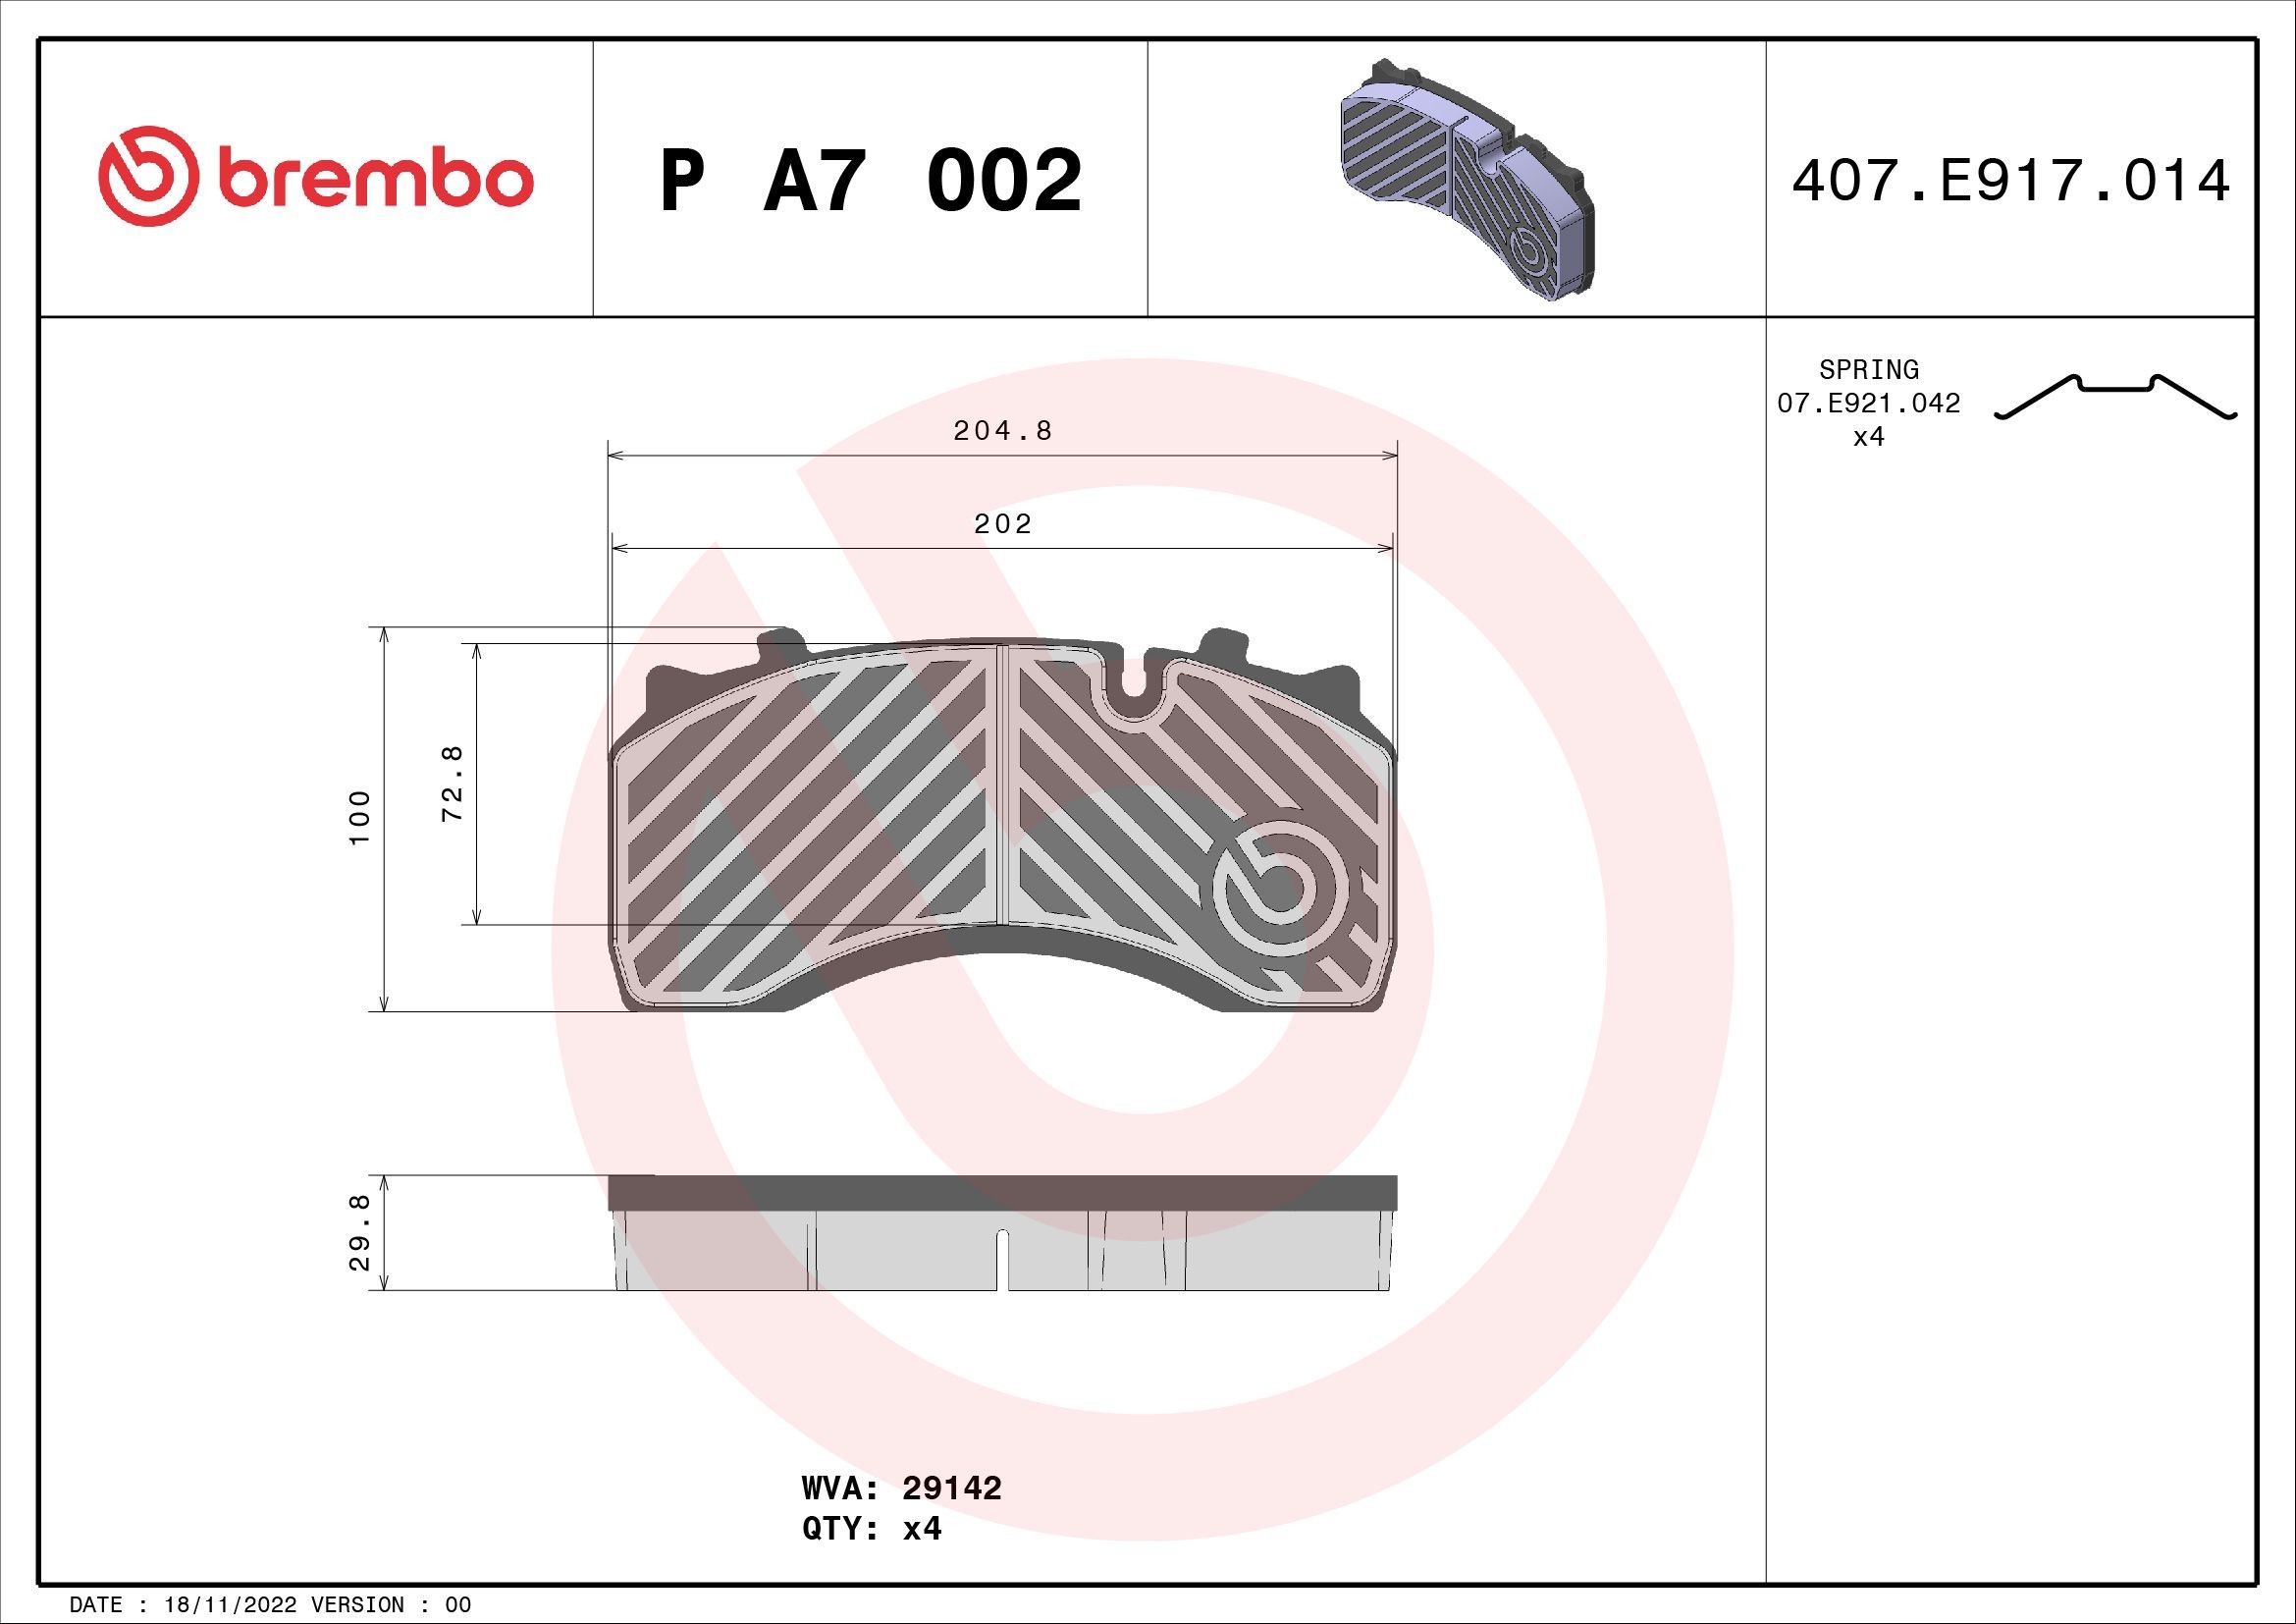 BREMBO prepared for wear indicator, with accessories Height: 100mm, Width: 205mm, Thickness: 30mm Brake pads P A7 002 buy